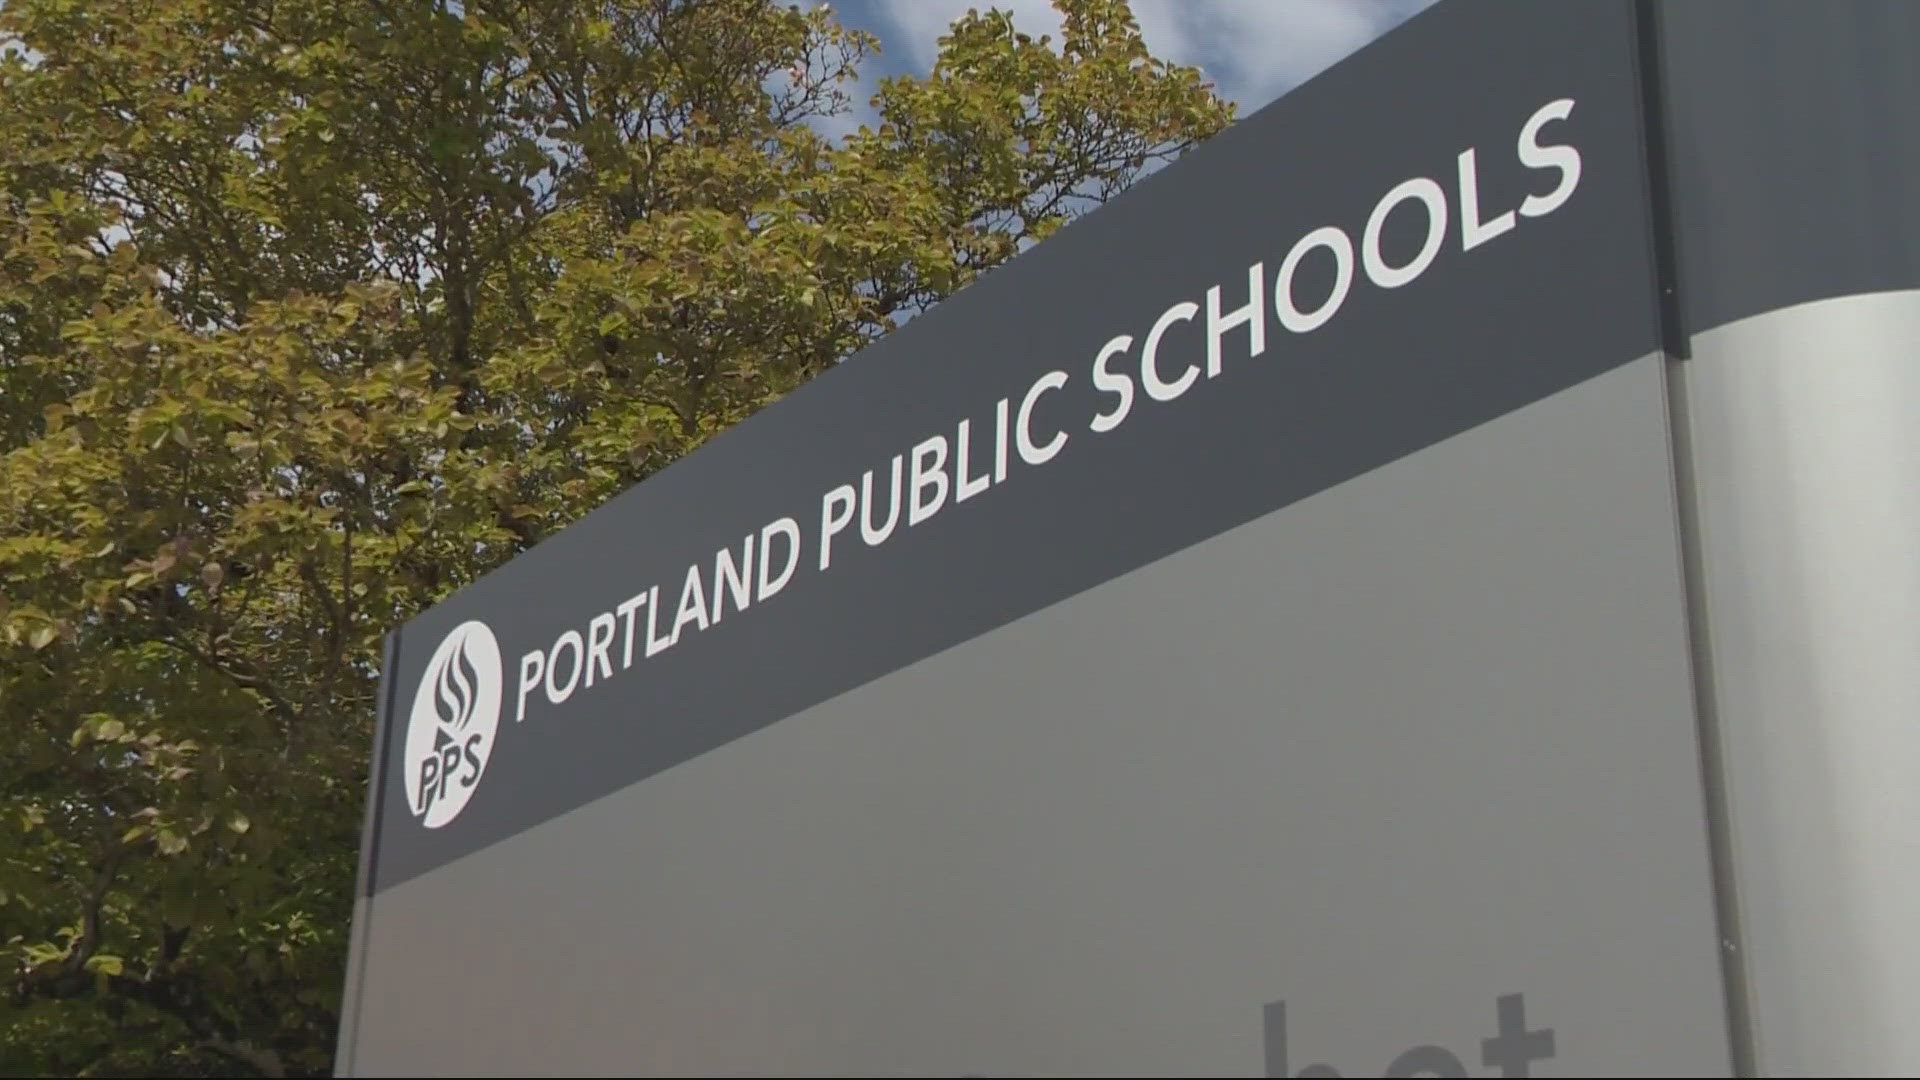 The district says students will now have to make up 11 missed school days due to the strike.